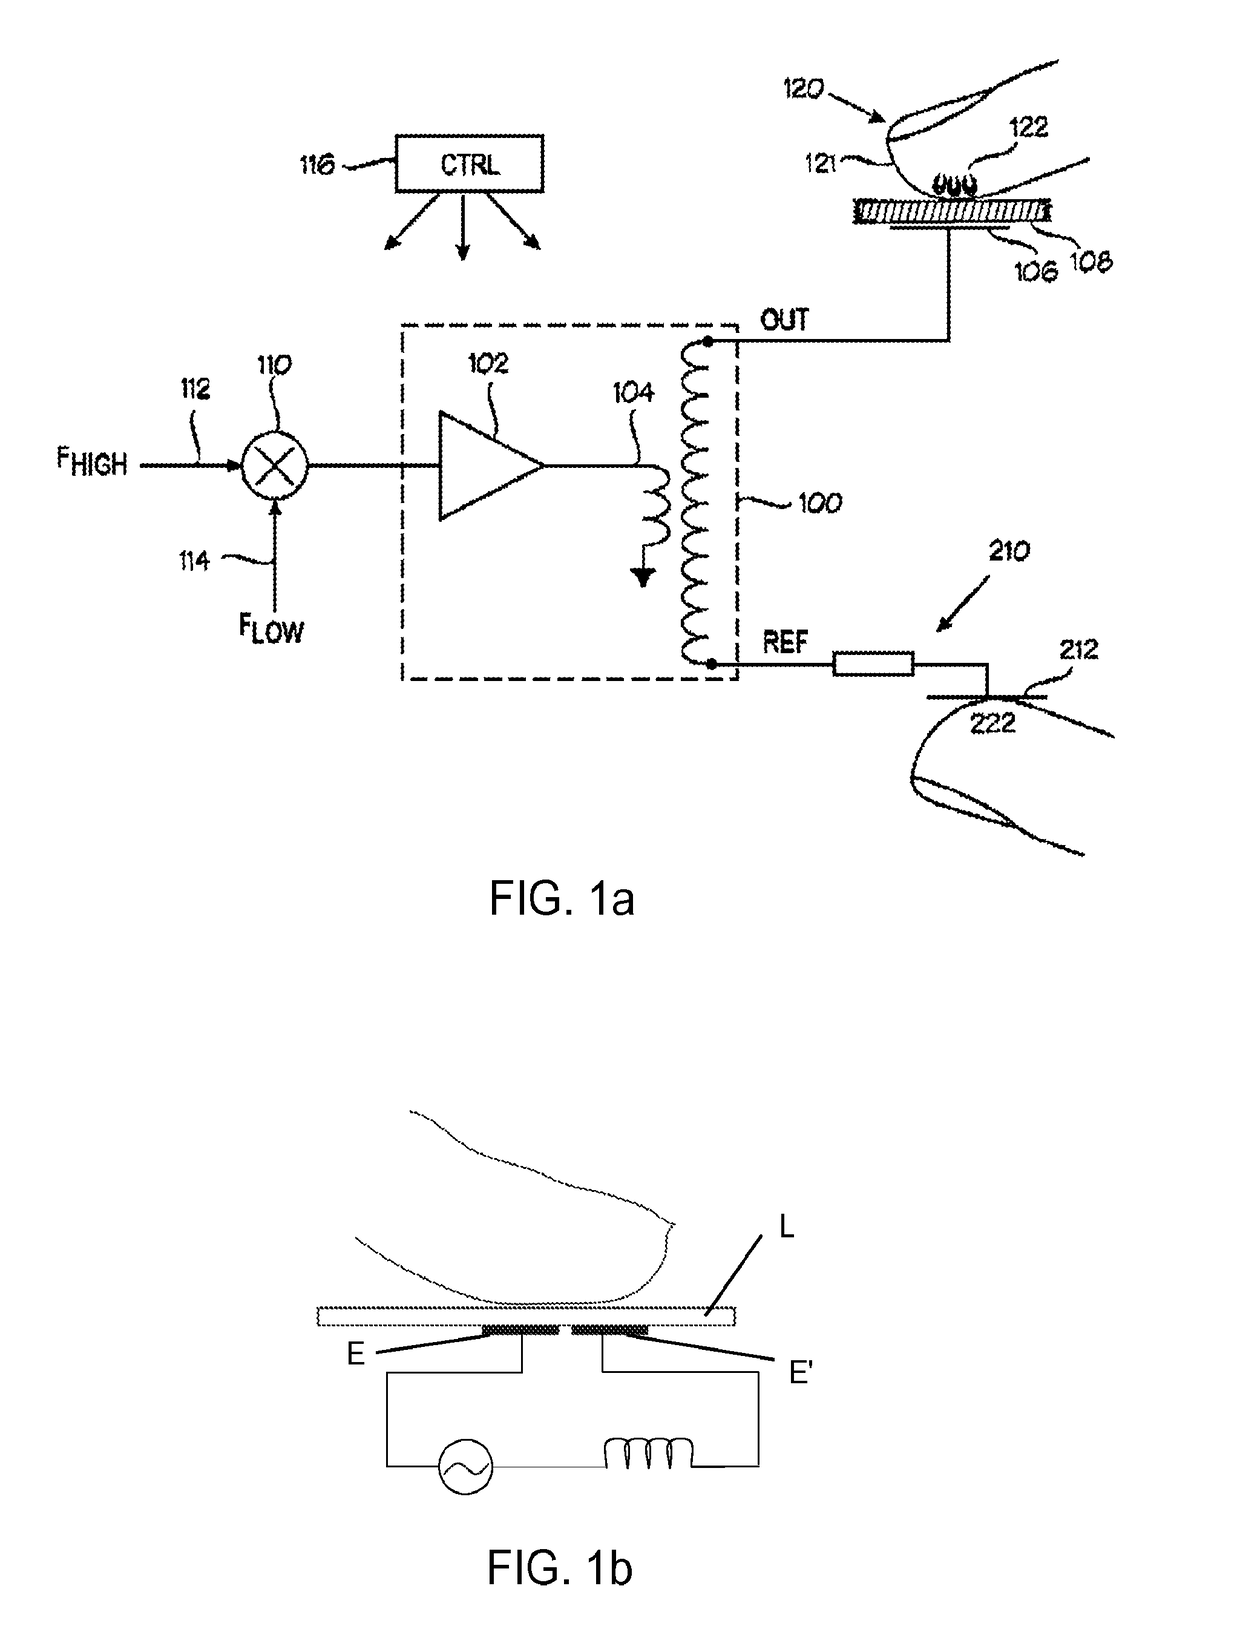 Haptic display with simultaneous sensing and actuation